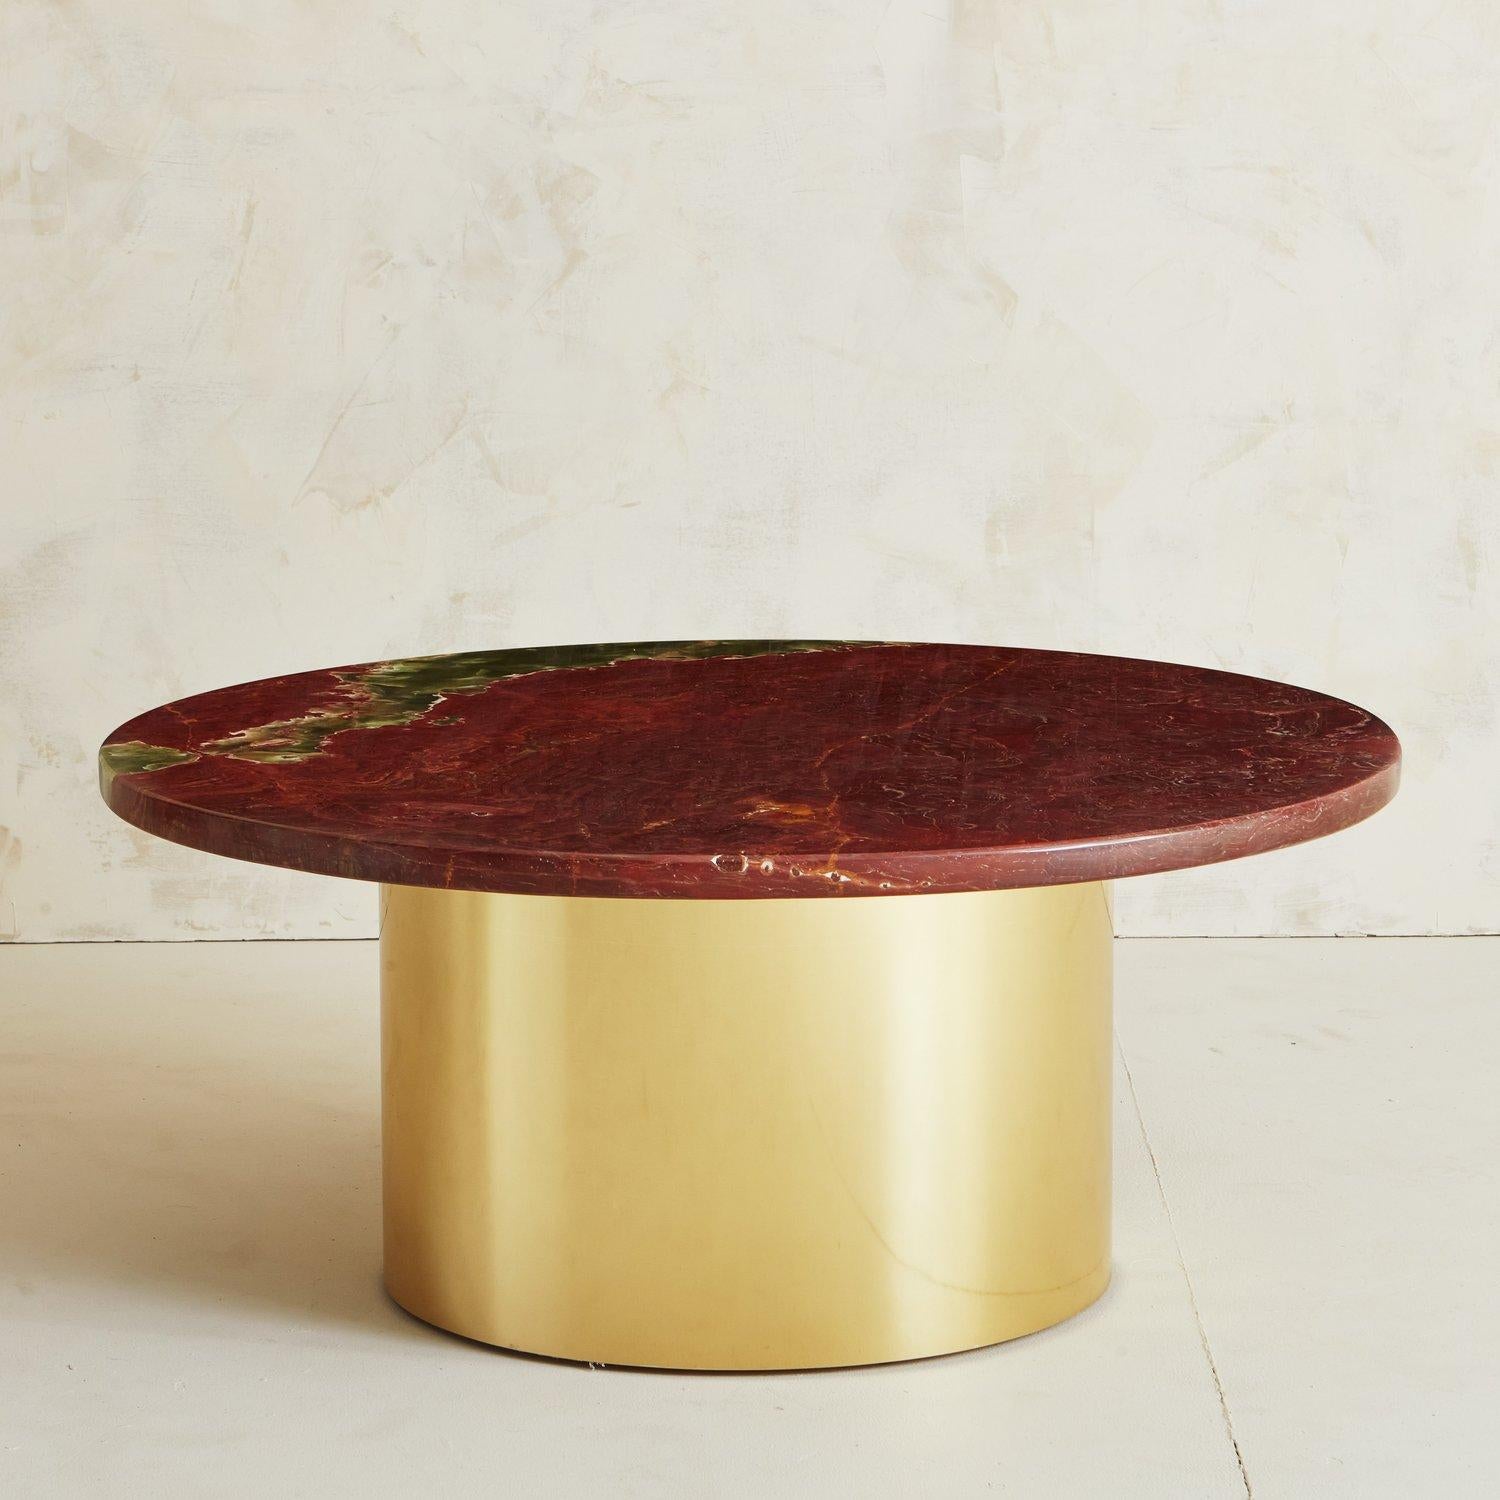 A beautiful coffee table featuring a 1.25” thick red onyx tabletop with stunning green and gray veining. This table has a custom built round cylindrical base wrapped in polished brass. This piece is truly one of a kind and would elevate any